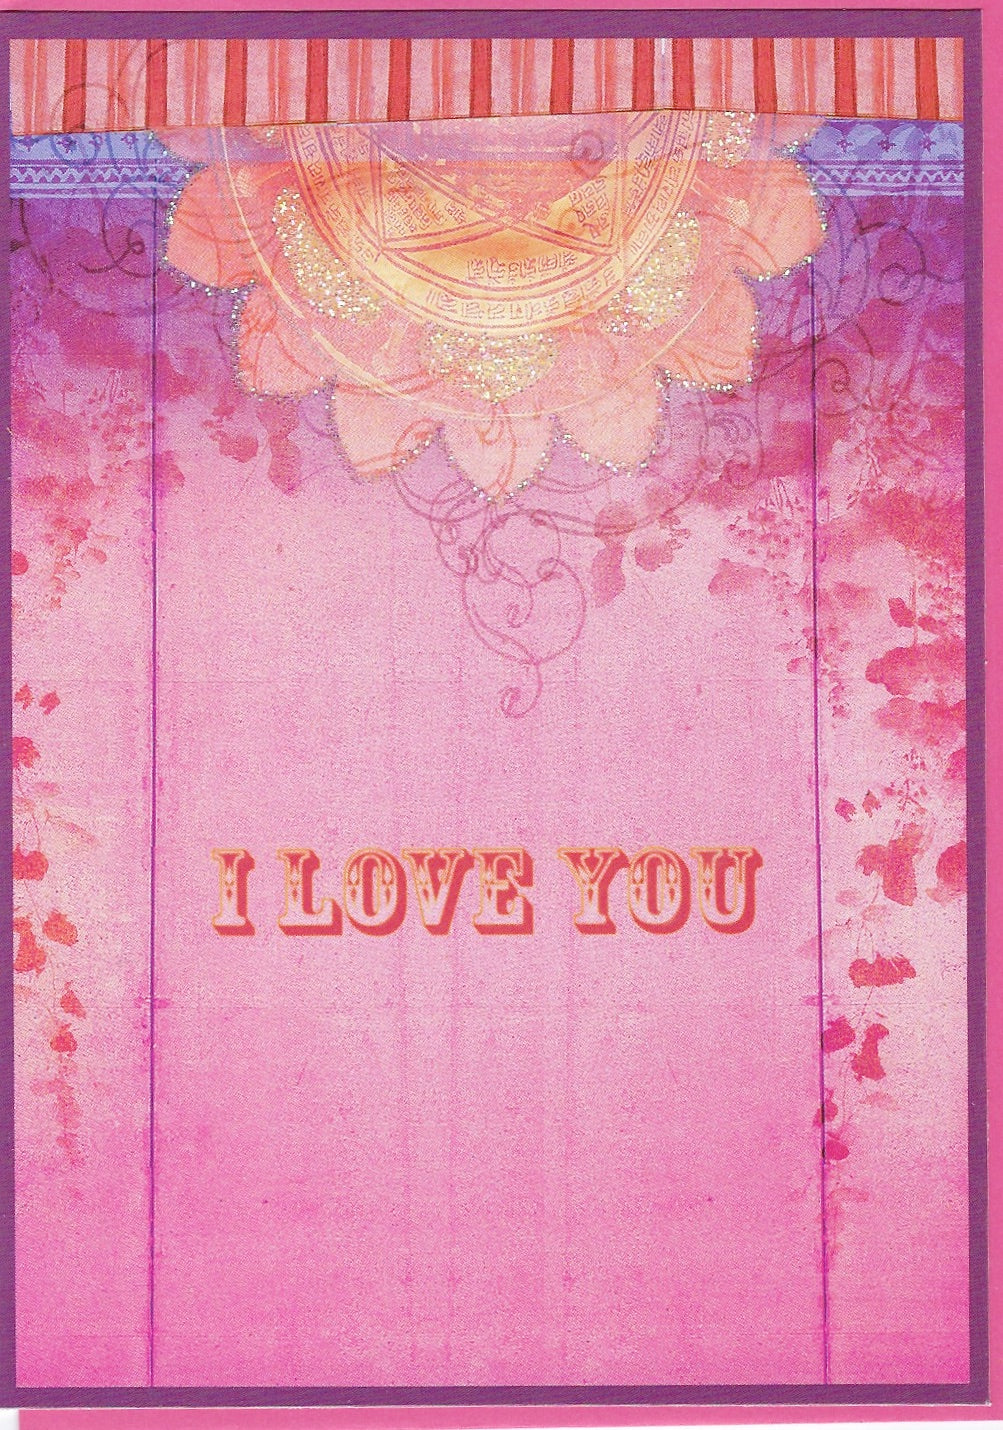 A vibrant greeting card with "i love you" text in the center, decorated with abstract pink and purple watercolor splashes, and an intricate golden motif at the top. It comes with a dark All Occasion Greeting Card - I Love You from Greeting Cards.